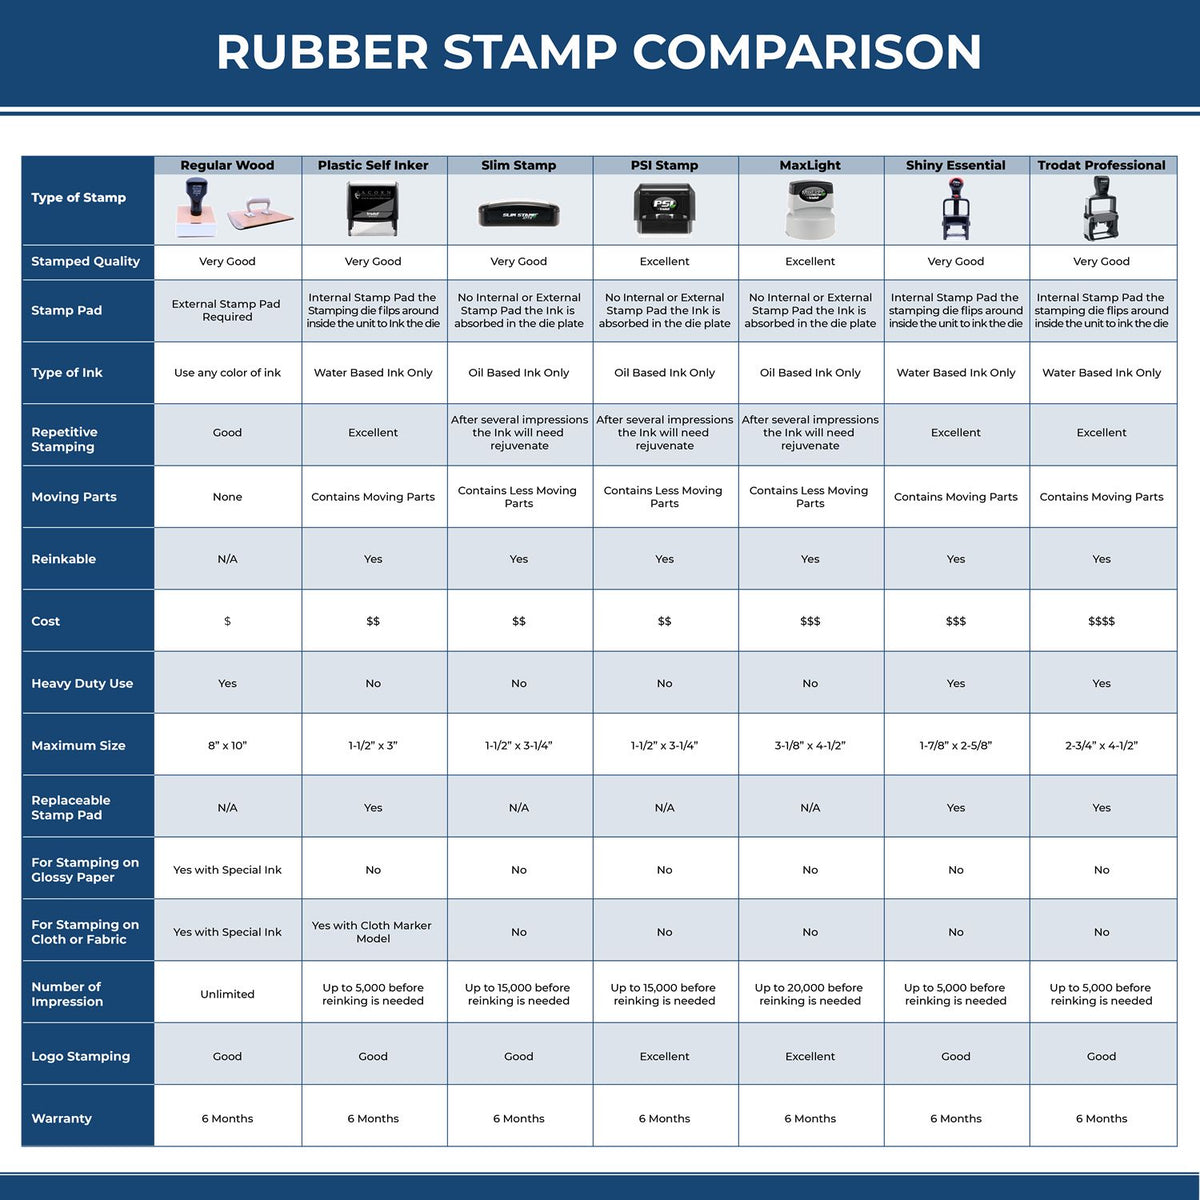 Temporarily Away Rubber Stamp 4758R Rubber Stamp Comparison